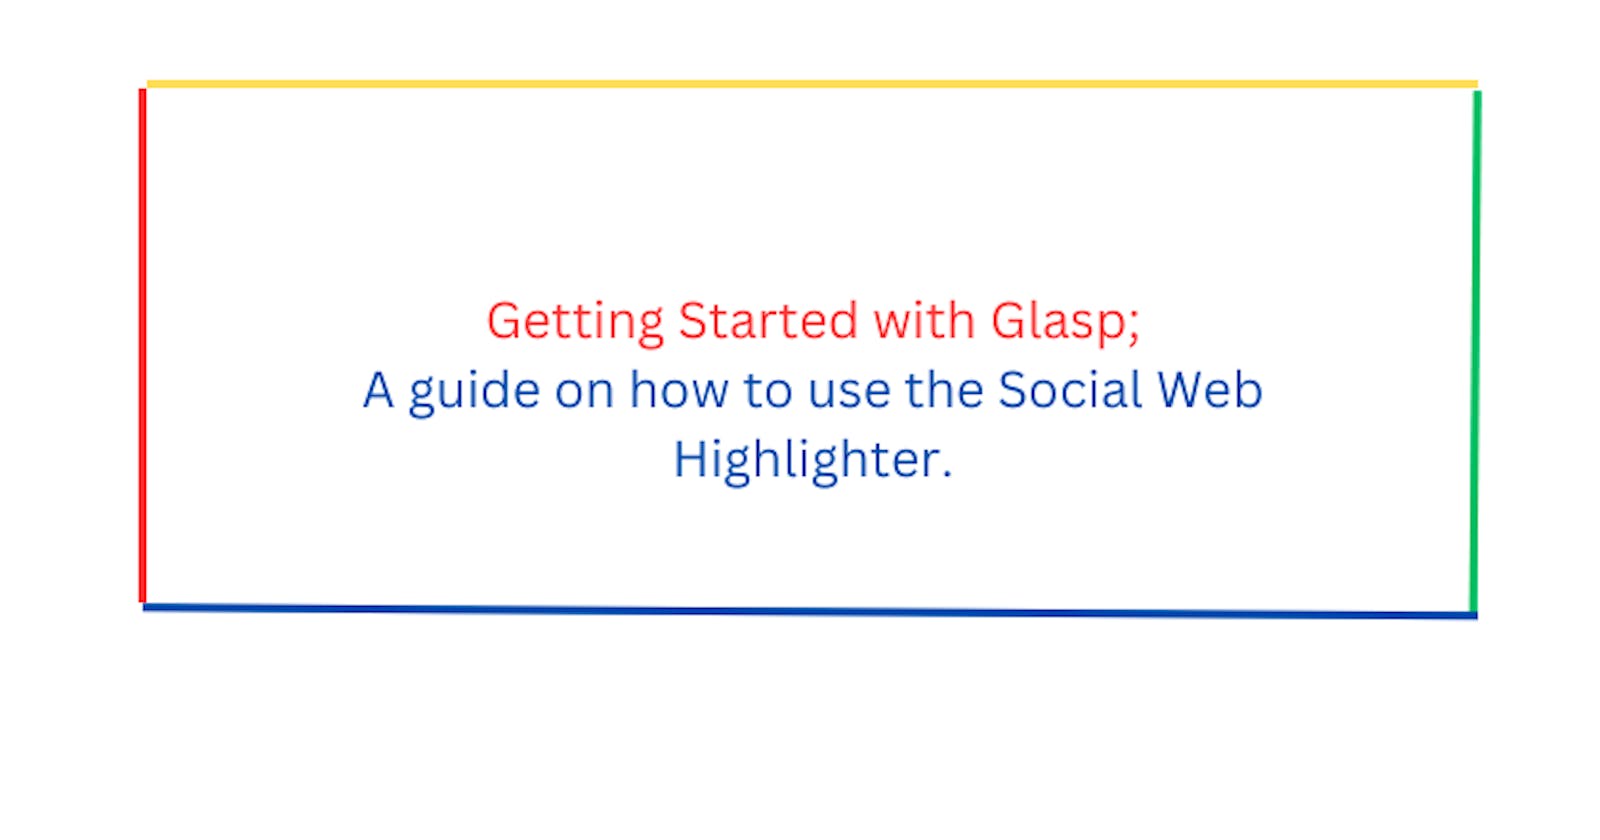 Getting Started with Glasp